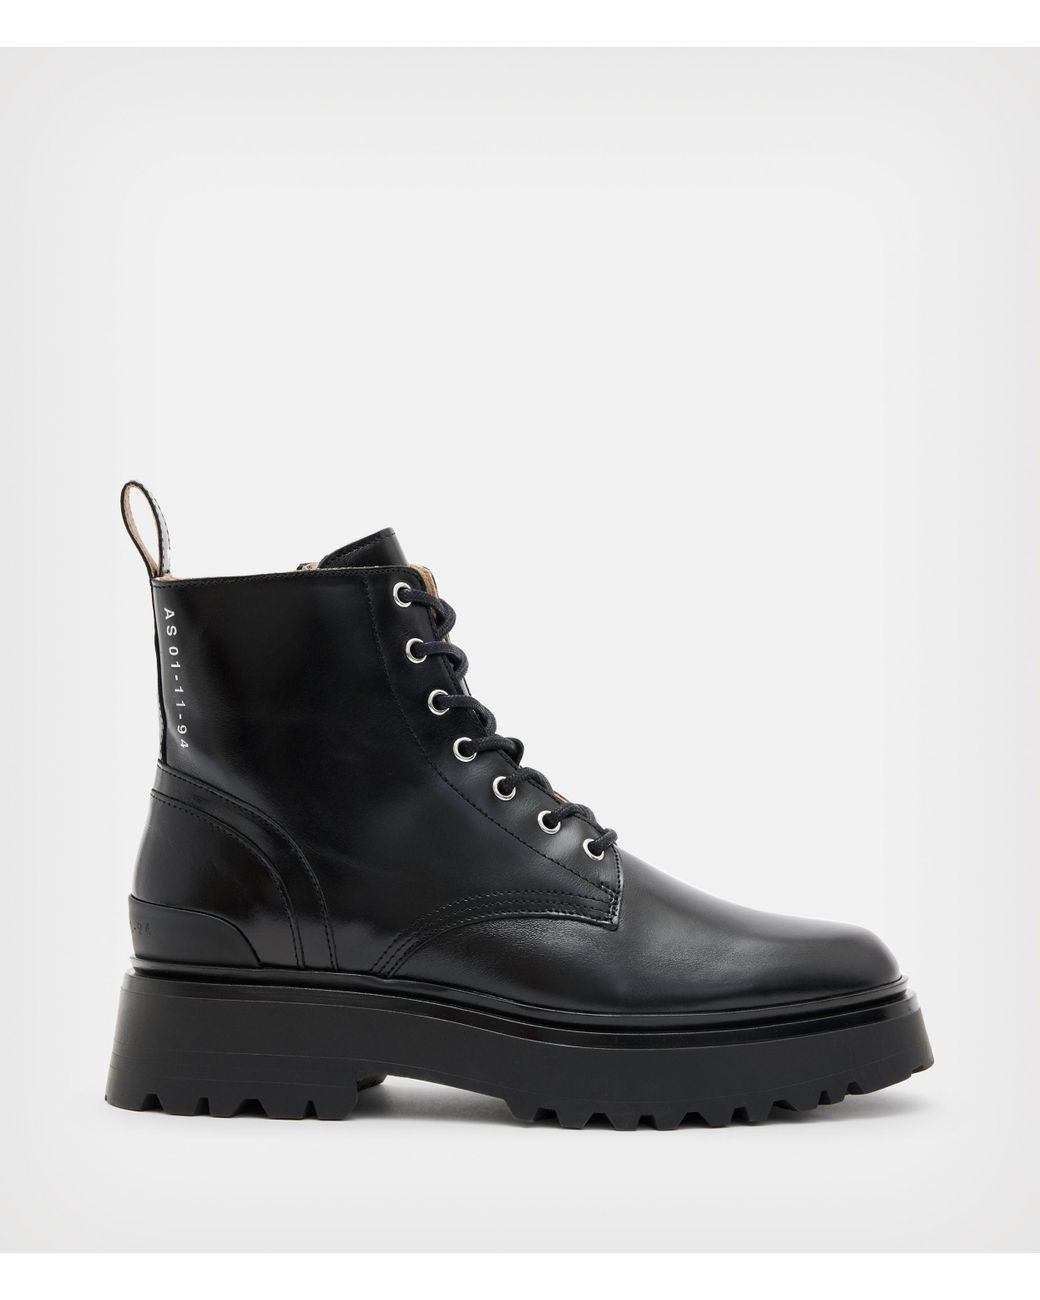 AllSaints Flint Leather Boots in Black | Lyst Canada